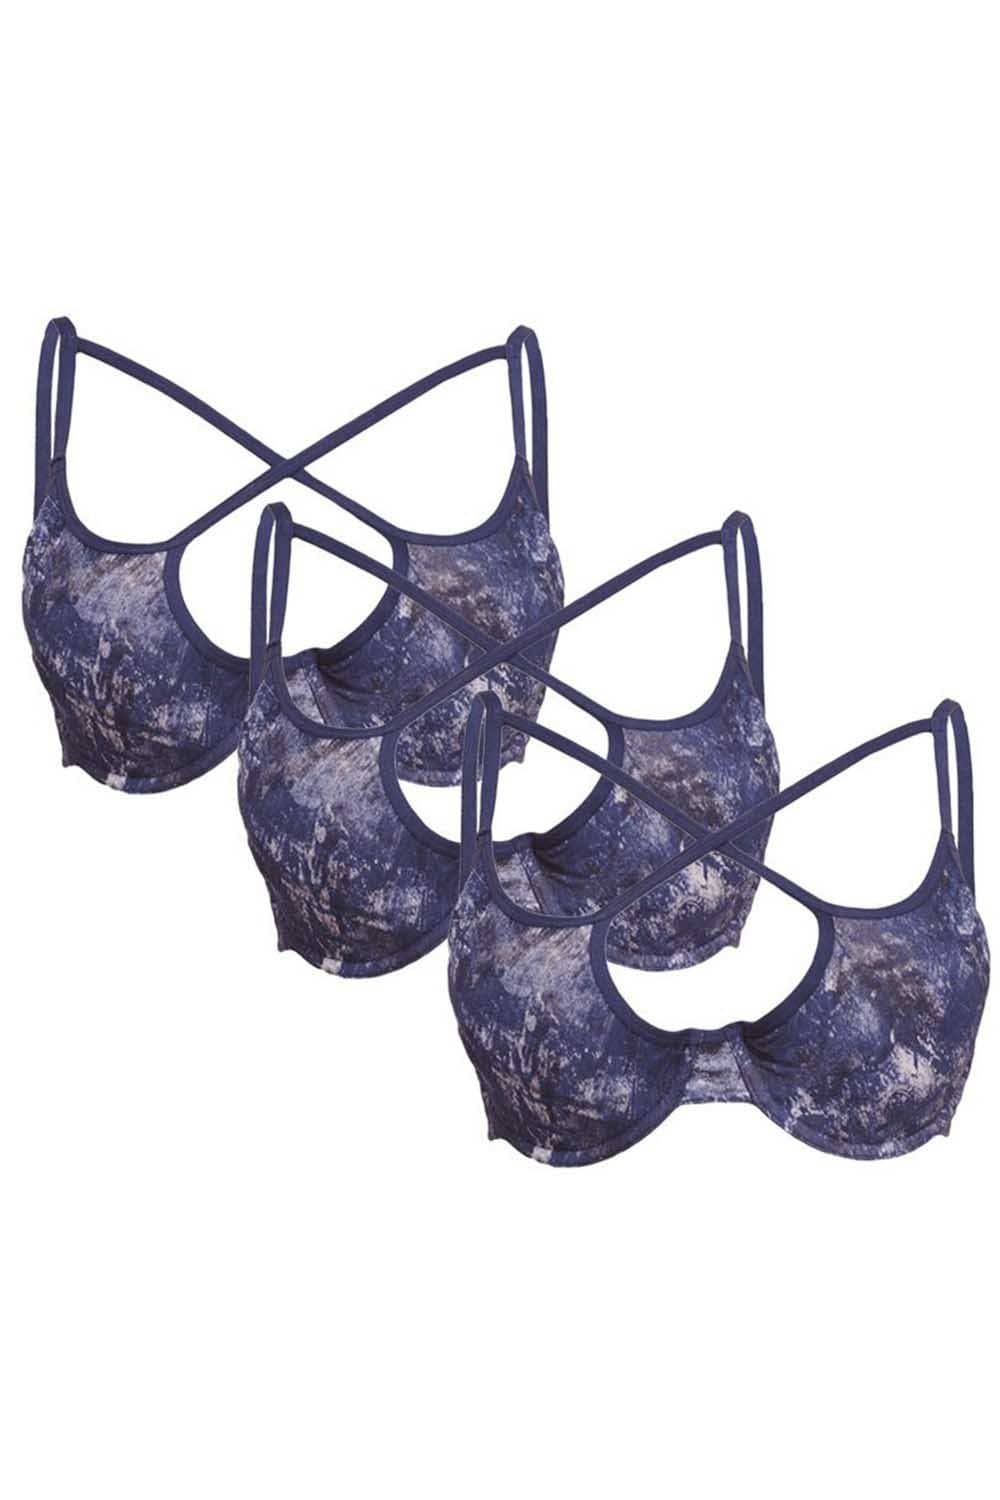 Buy Inner Sense Organic Cotton Antimicrobial Lightly Padded Underwired Cage  Bra Online at Best Prices in India - JioMart.